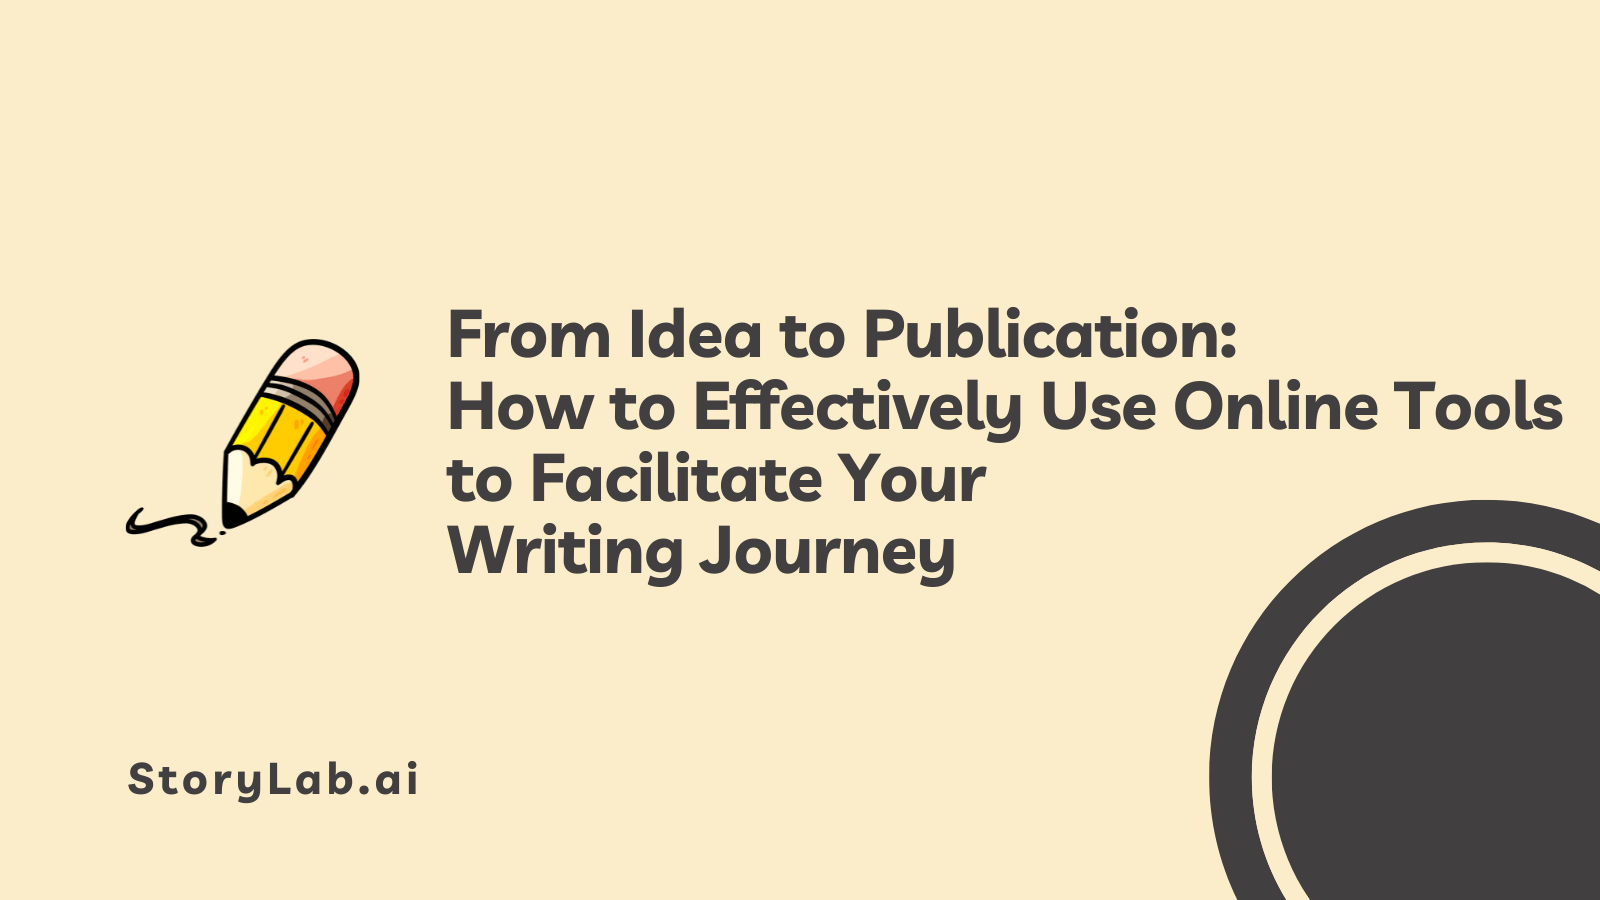 From Idea to Publication How to Effectively Use Online Tools to Facilitate Your Writing Journey